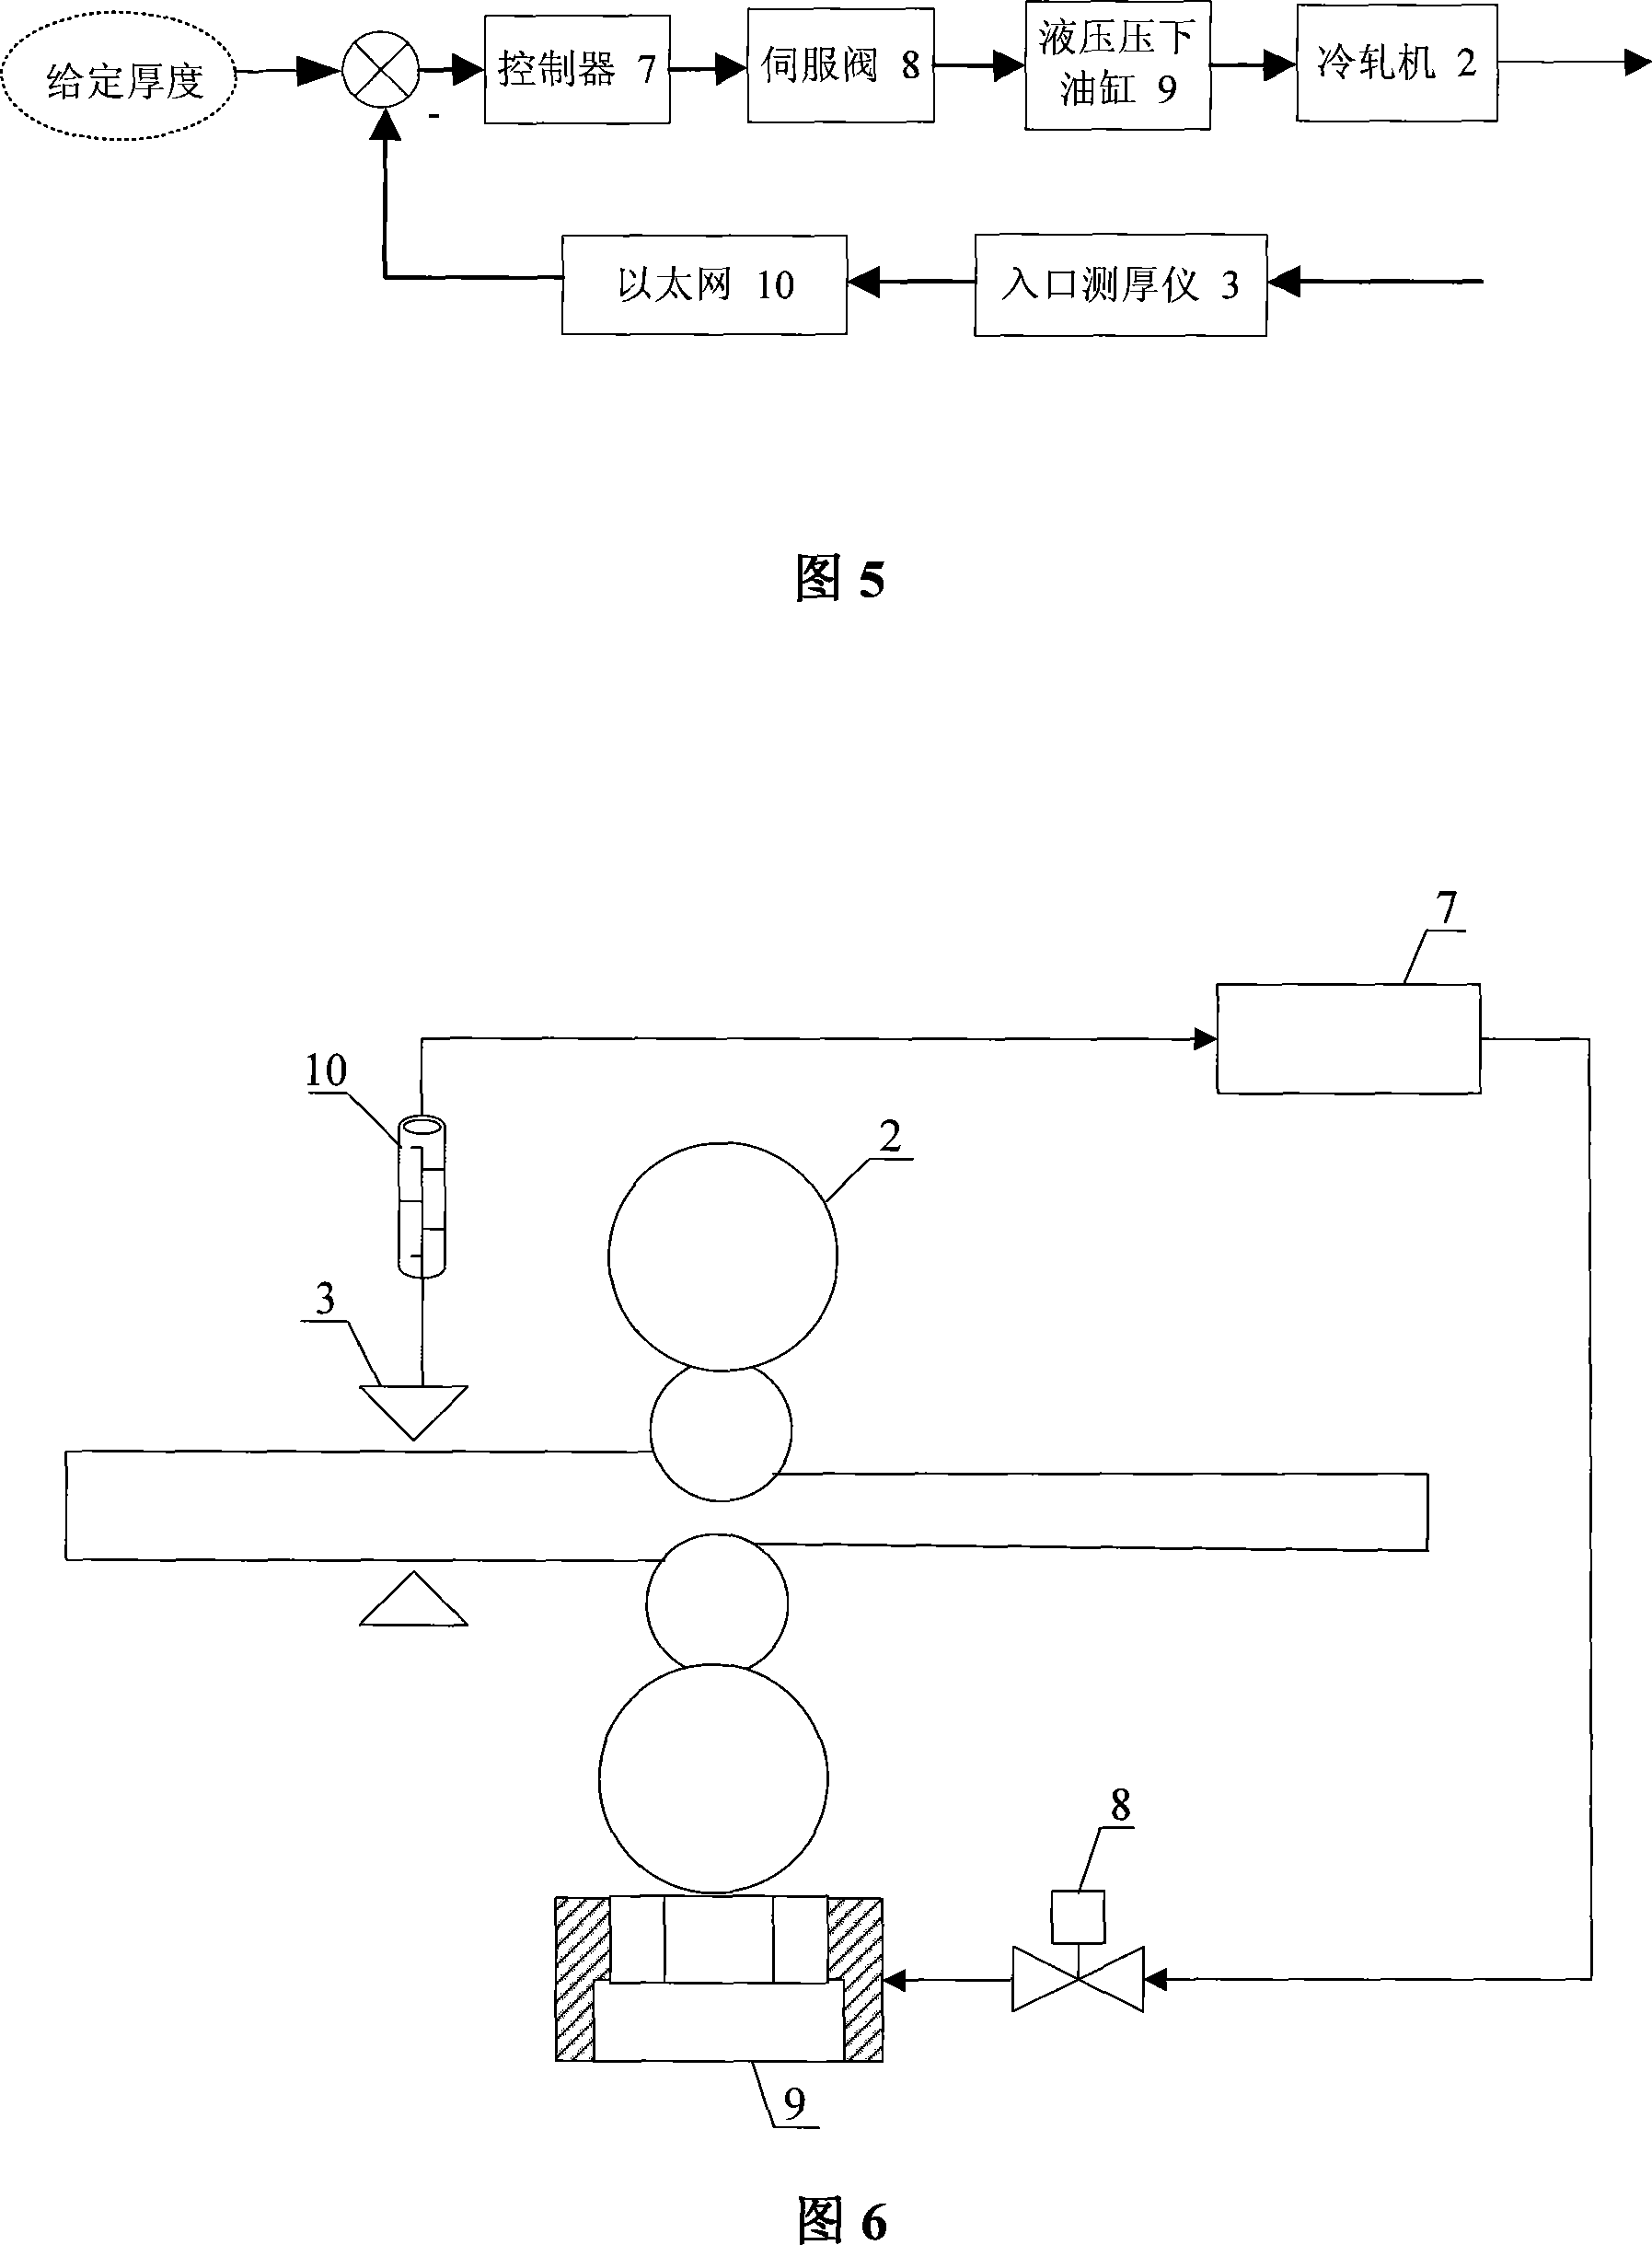 Network feedforward control method of cold rolling mill thickness control system